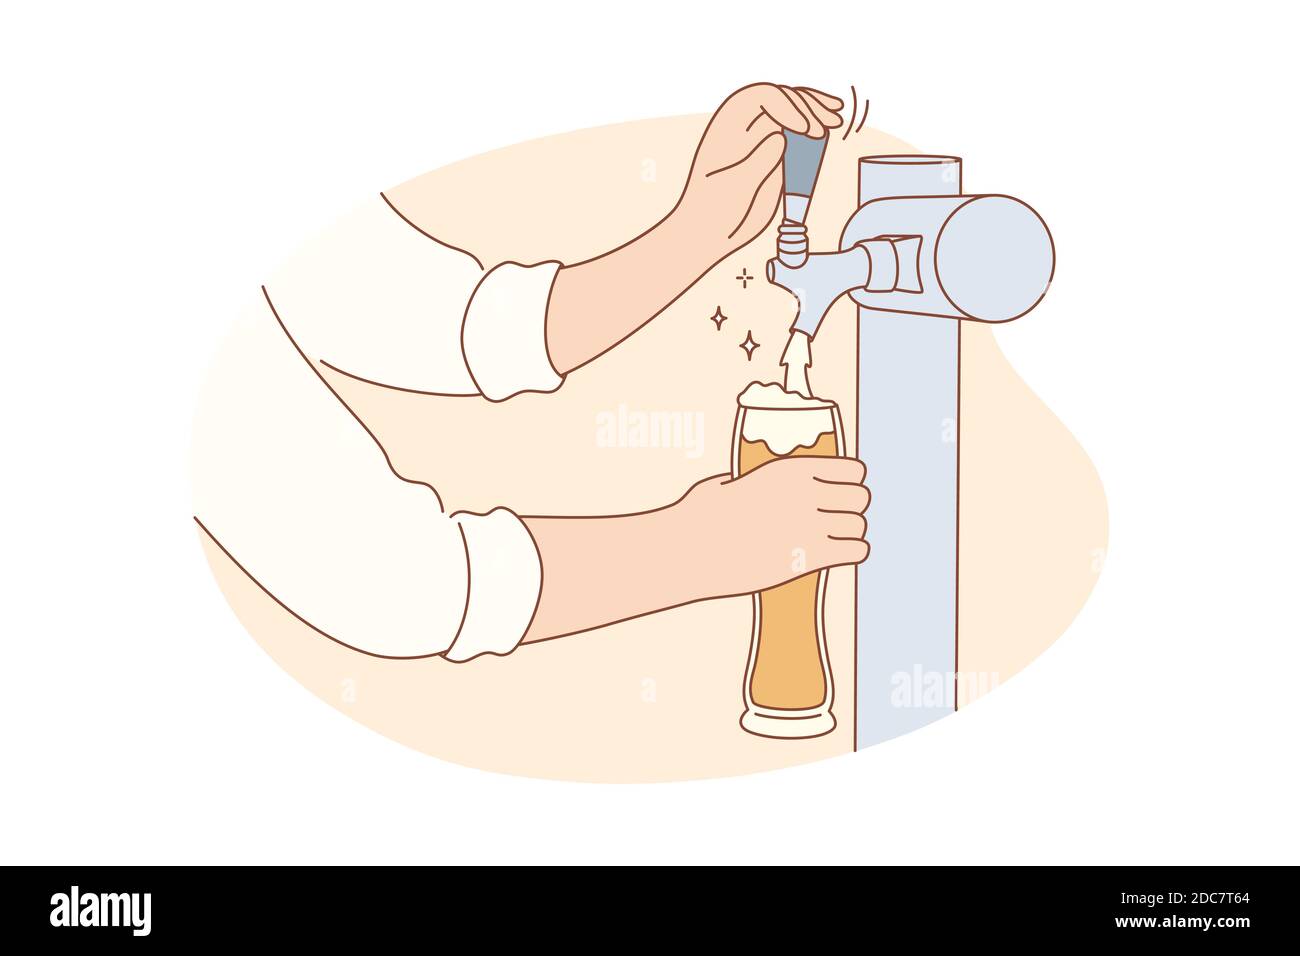 Drink, nightlife, alcohol, work, job concept. Human man bartender character hands holding glass pouring craft beer alcoholic beverage in city pub. Pro Stock Vector